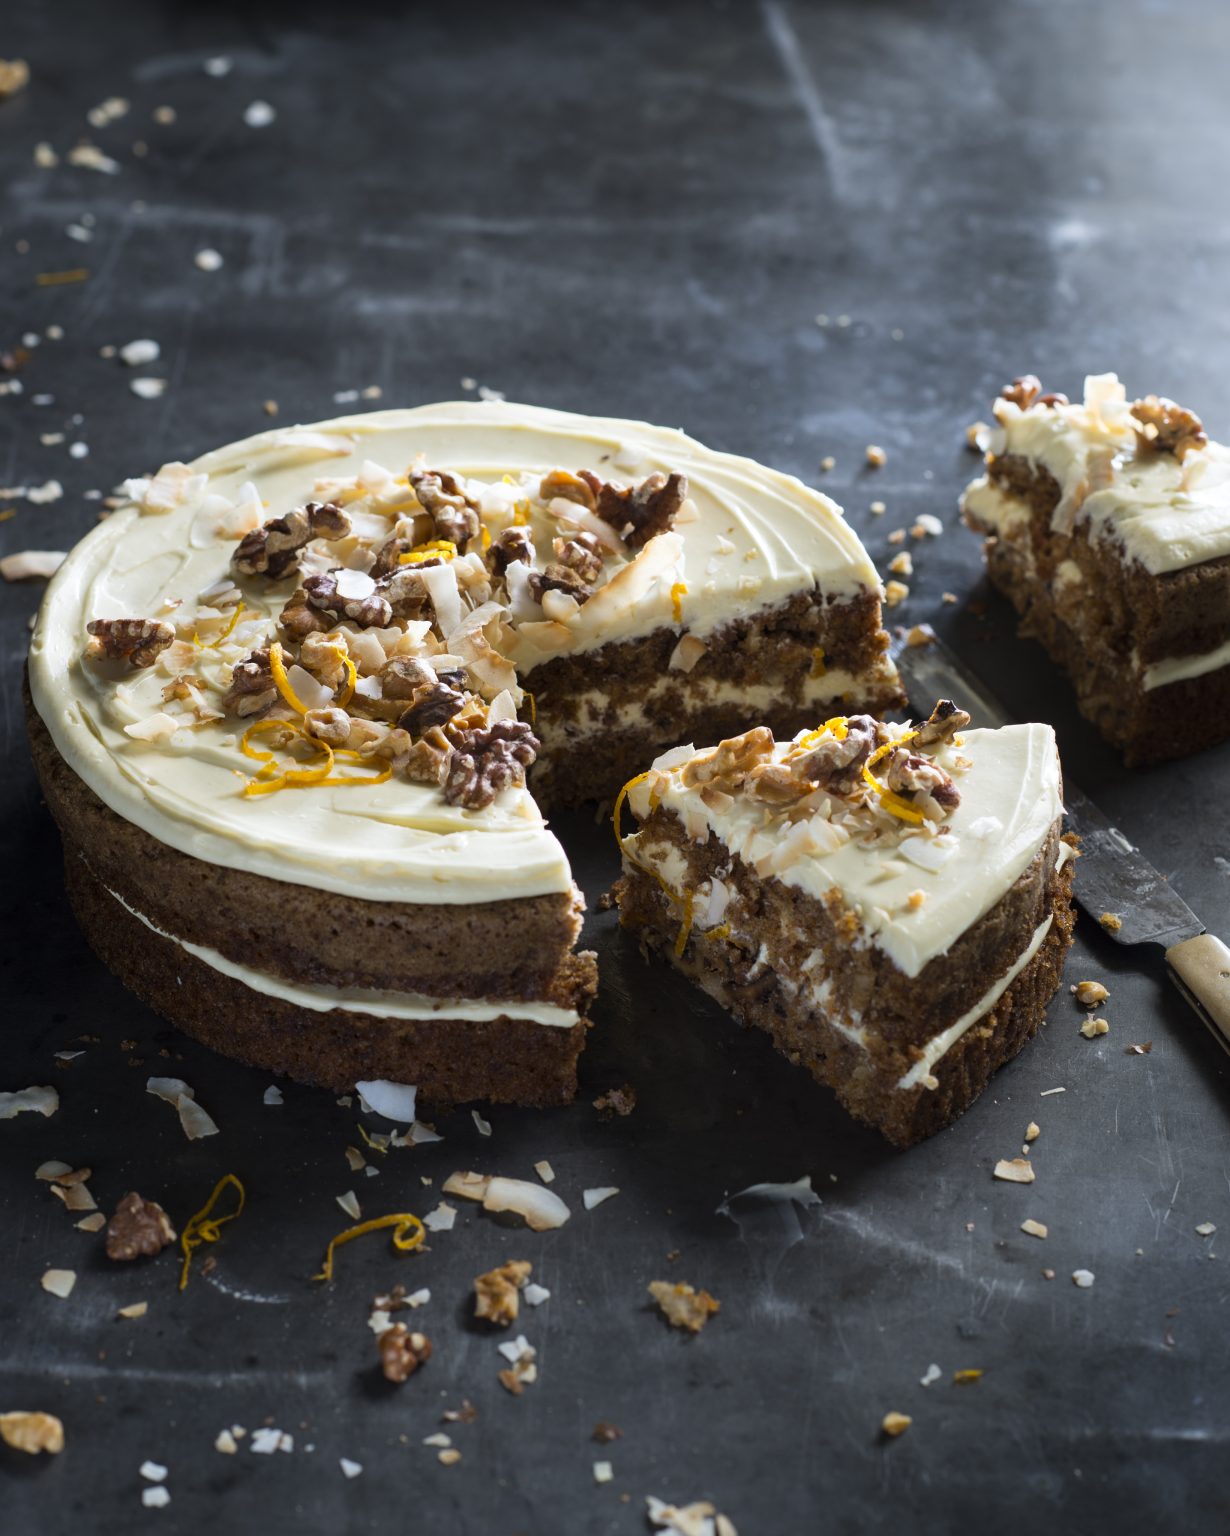 Wholesome carrot cake: a moist and flavorful cake packed with grated carrots, nuts, and warm spices, topped with creamy frosting